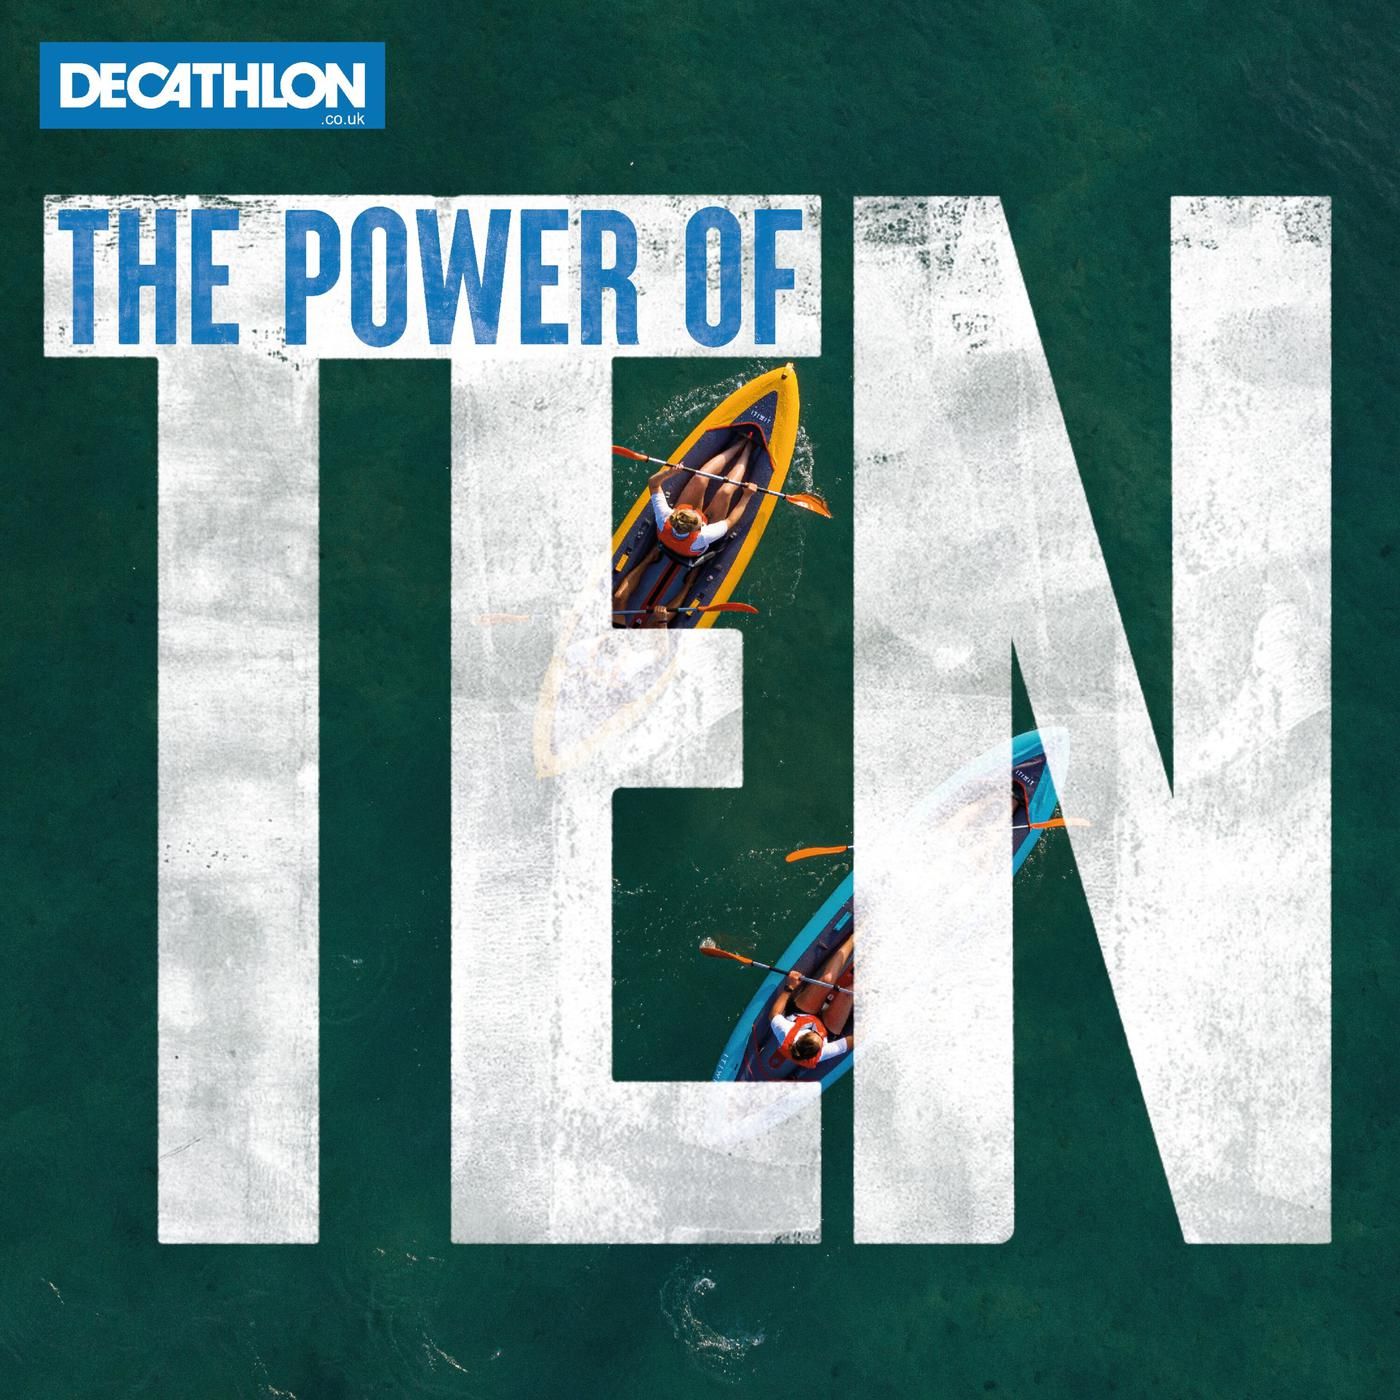 The Power of Ten Podcast